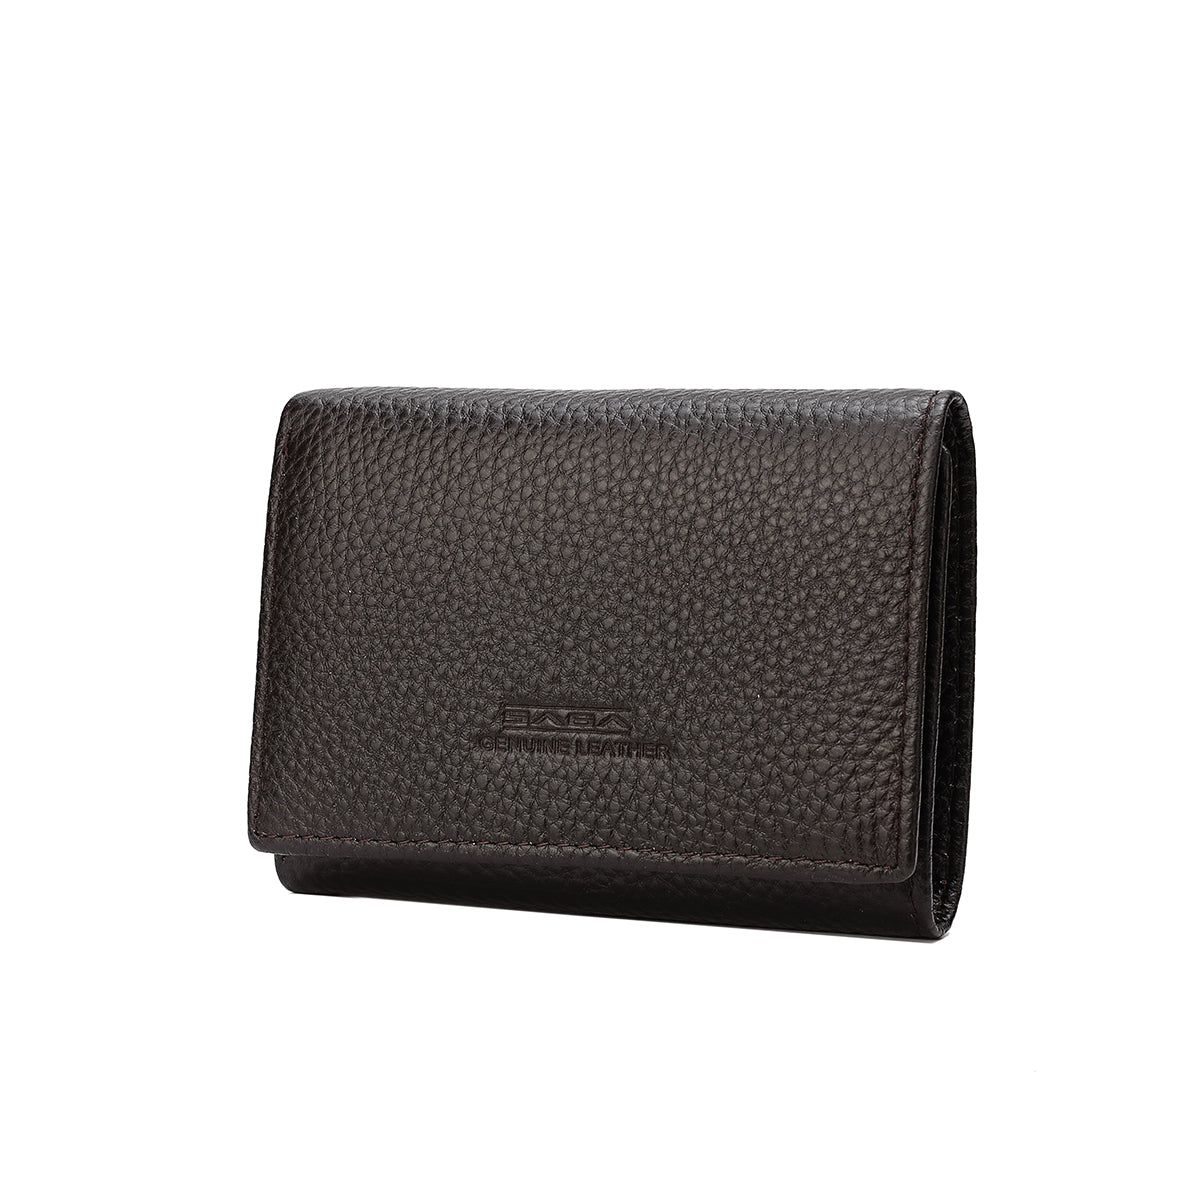 Practical genuine leather men's wallet available in two colors